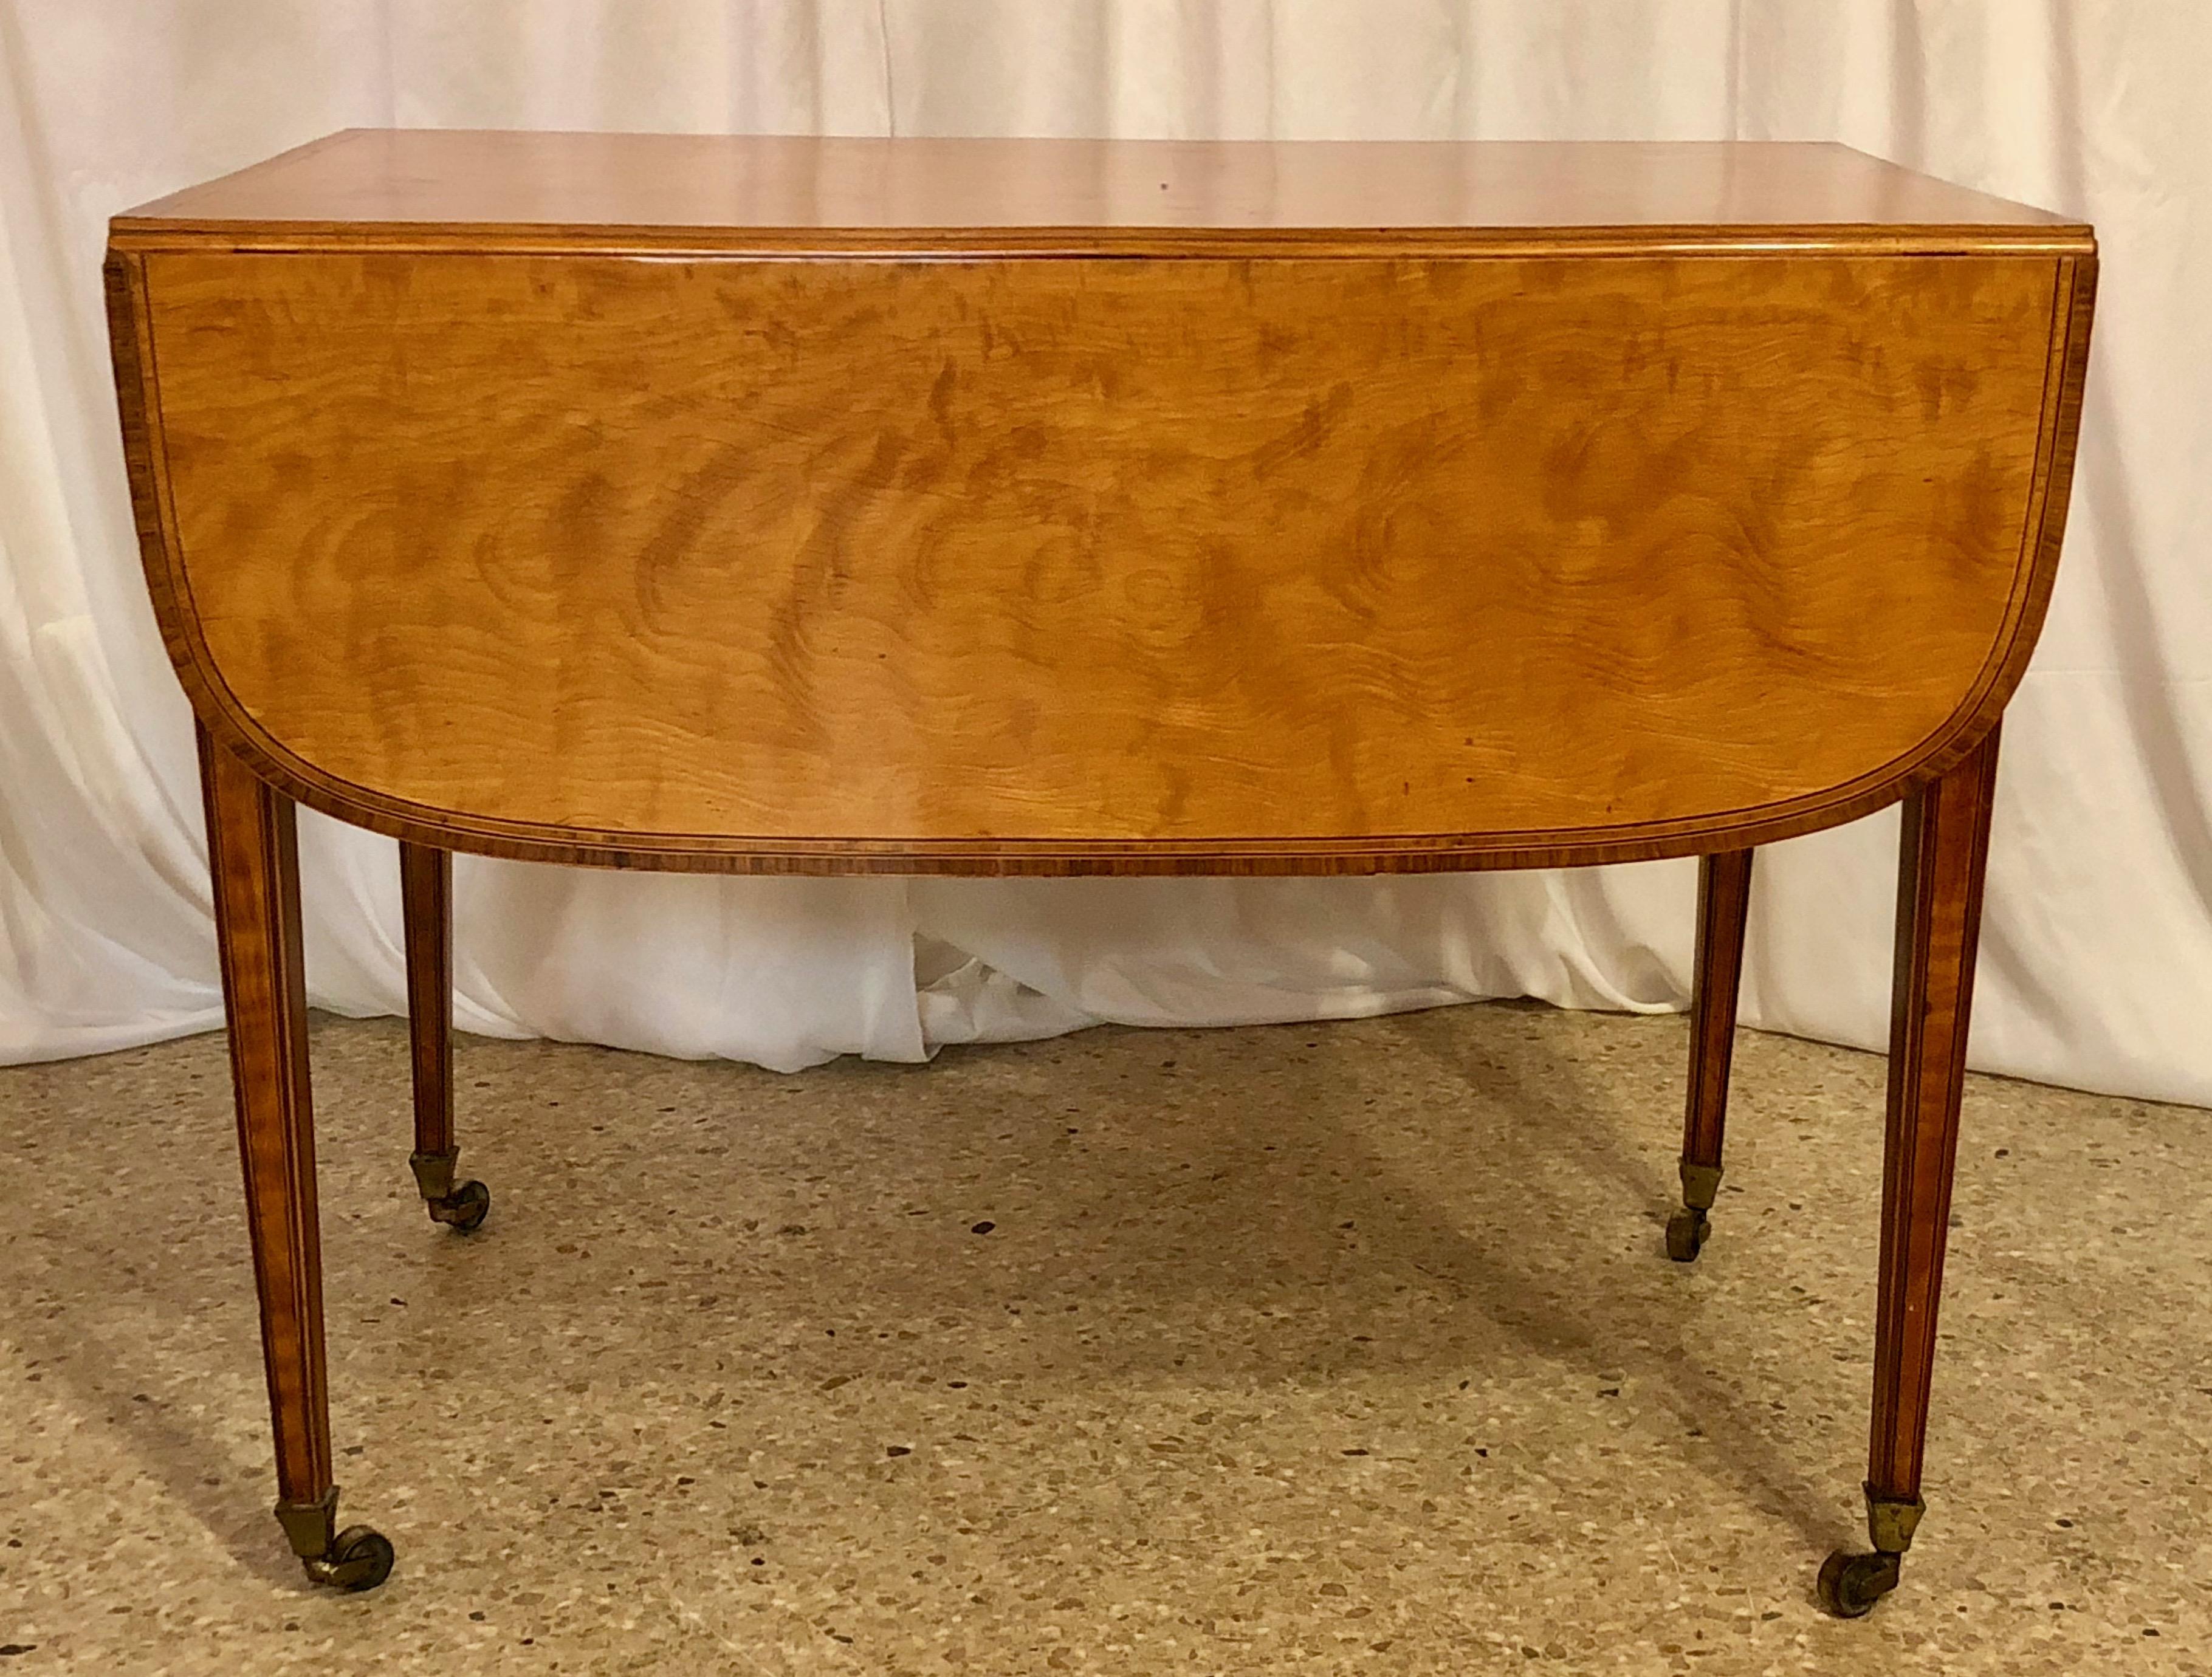 19th Century Antique English Satinwood Drop Leaf Table, circa 1810-1820 For Sale